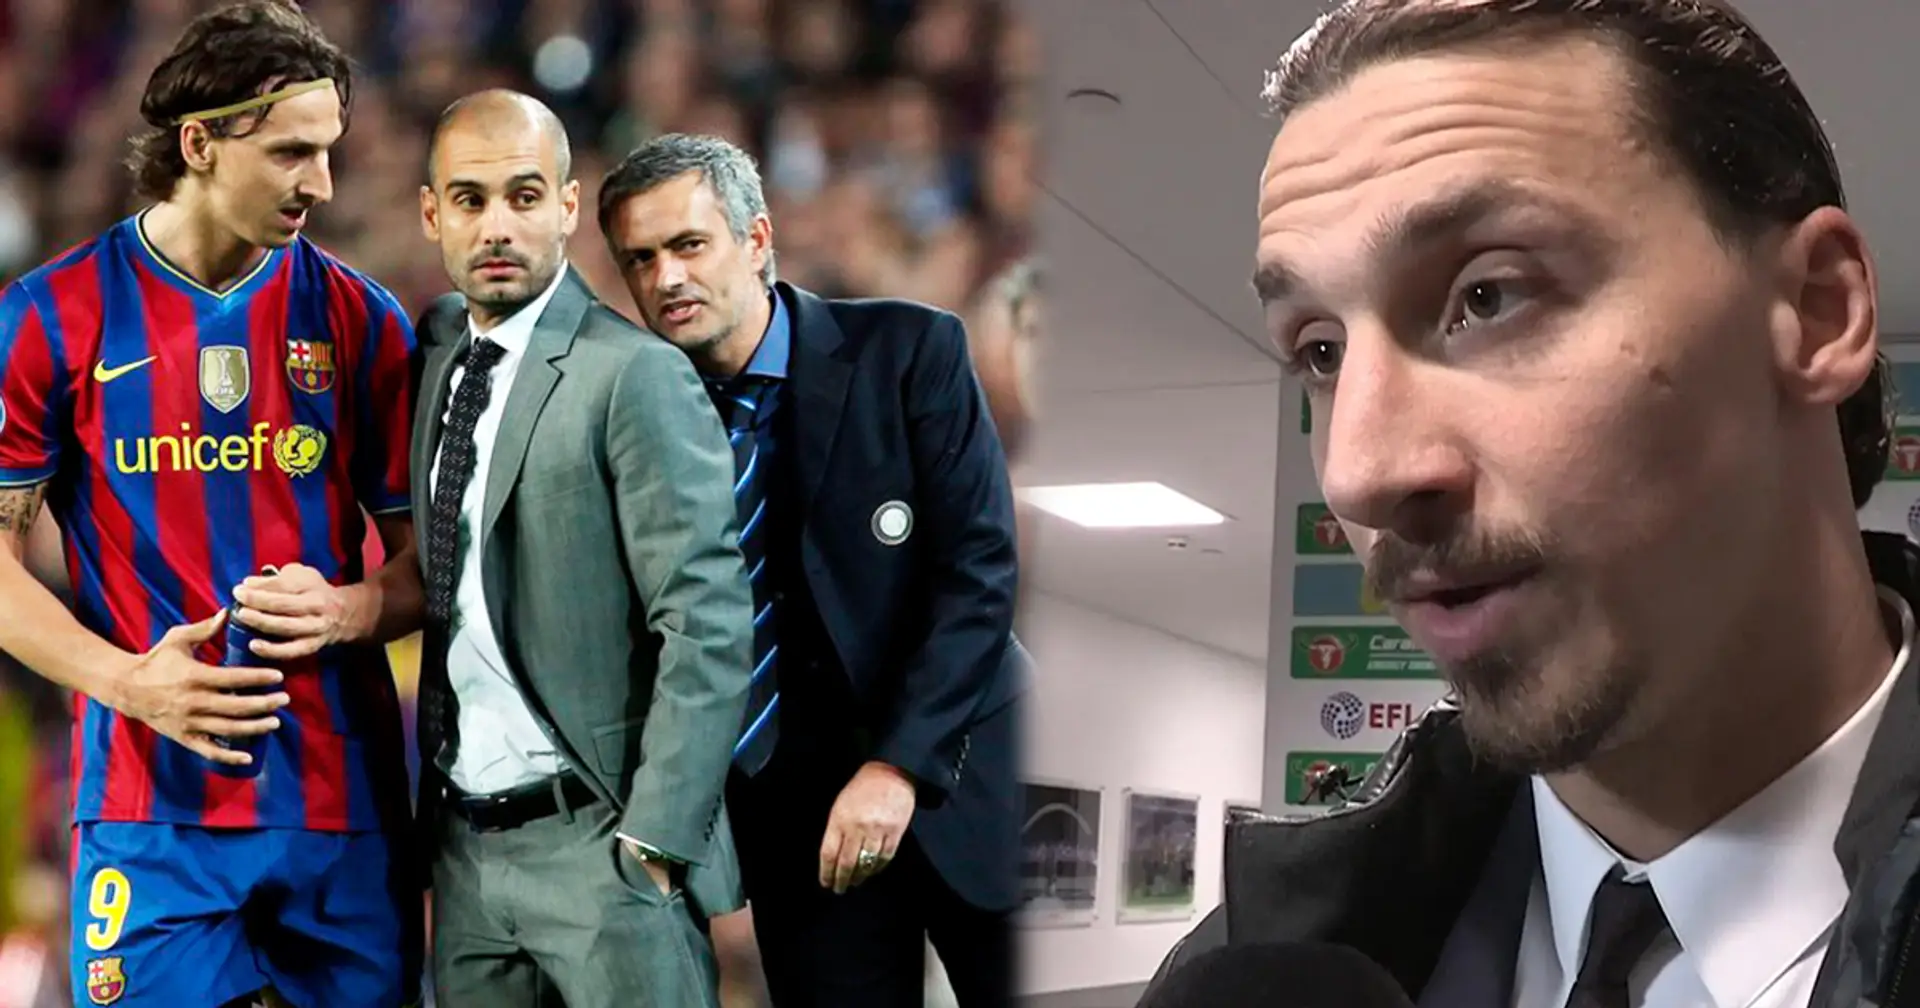 'He works twice as hard as all the rest': Zlatan Ibrahimovic opens up about working with Mourinho and Guardiola